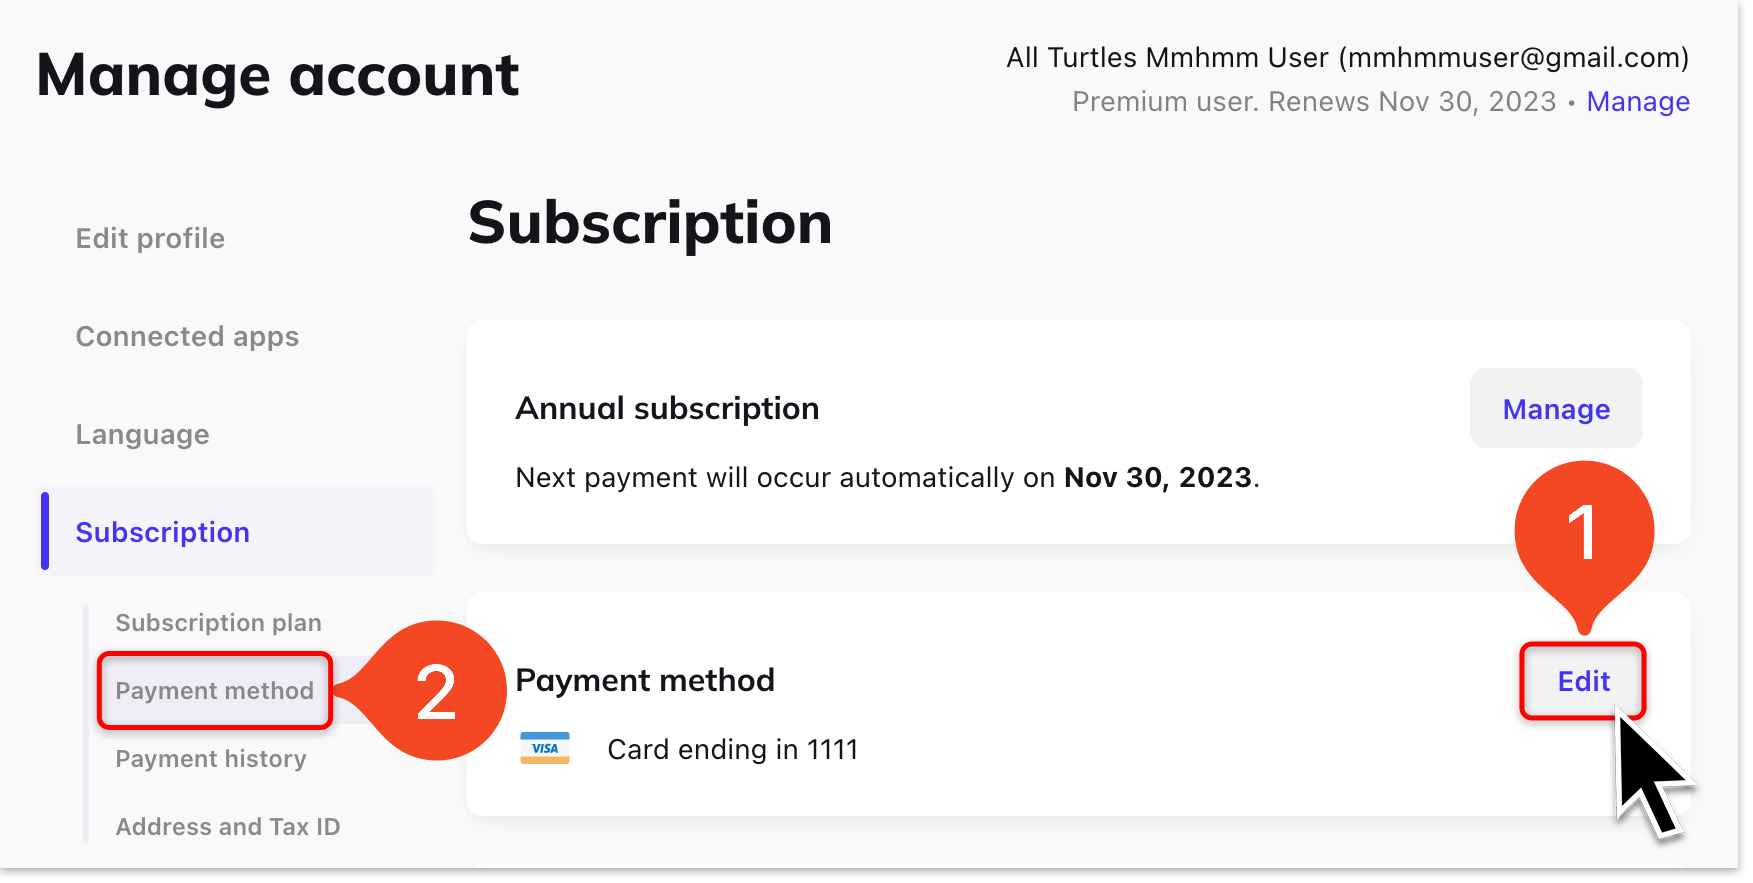 mmhmm_accounts_page_payment_method.png